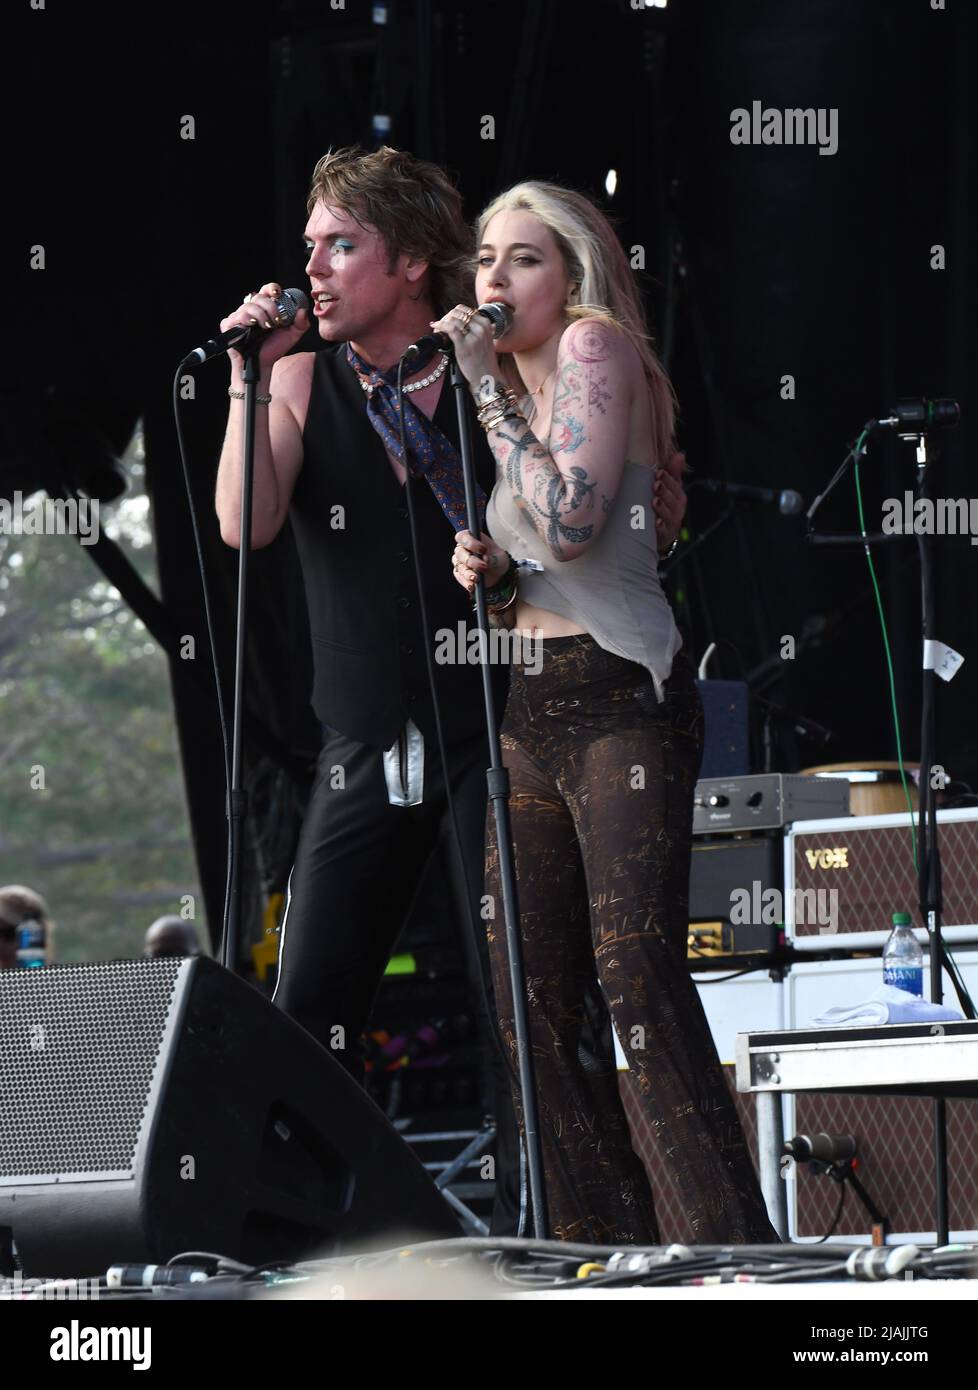 Lead singer Luke Spiller and special guest Paris Jackson are shown performing on stage during a live concert appearance The Struts during the Boston Calling music festival held in Allston, Massachusetts on May 27, 2022. Stock Photo